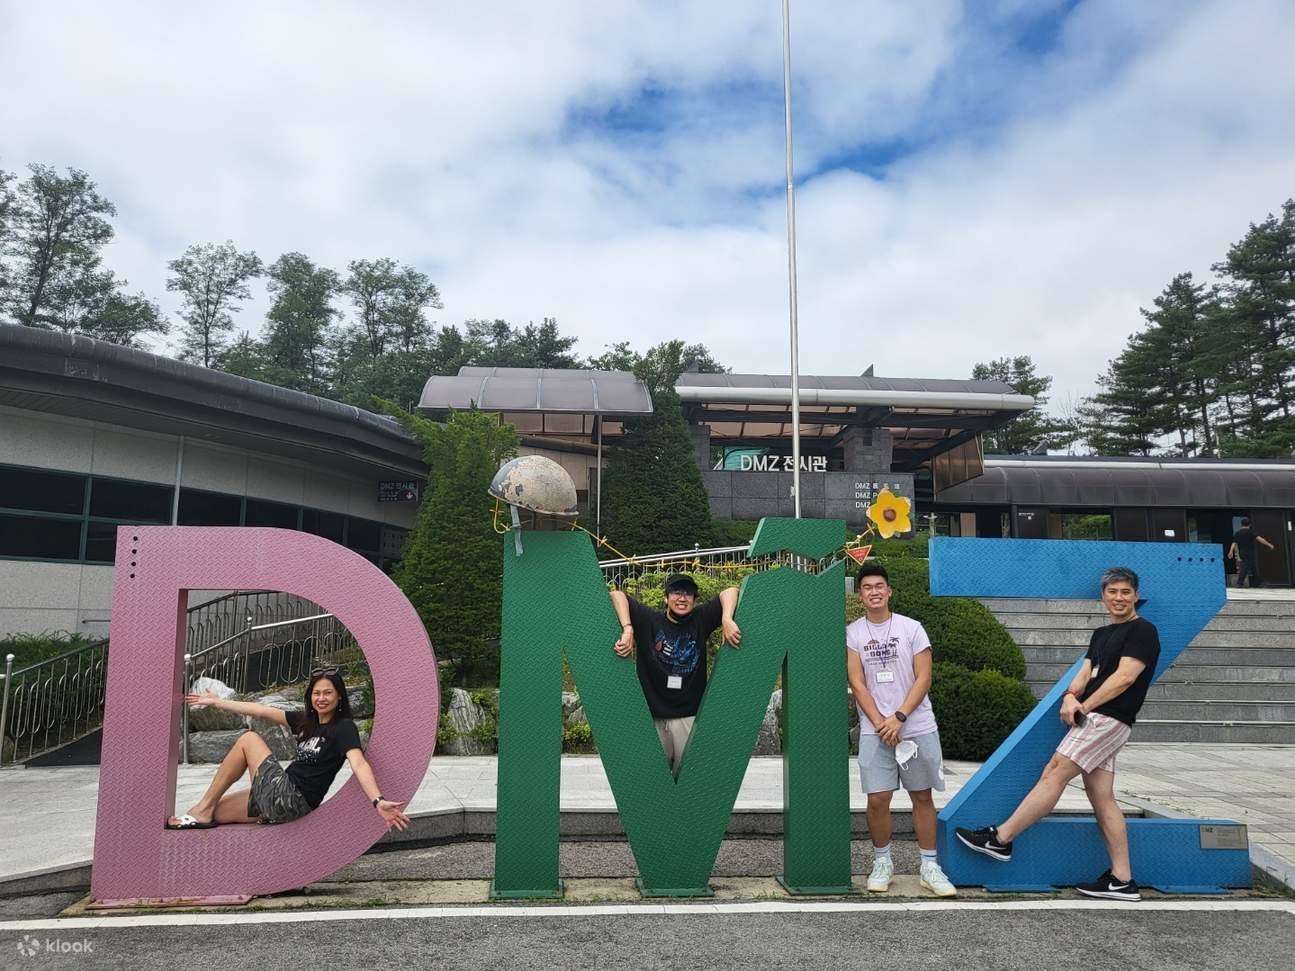 students pose with DMZ sign in Korea